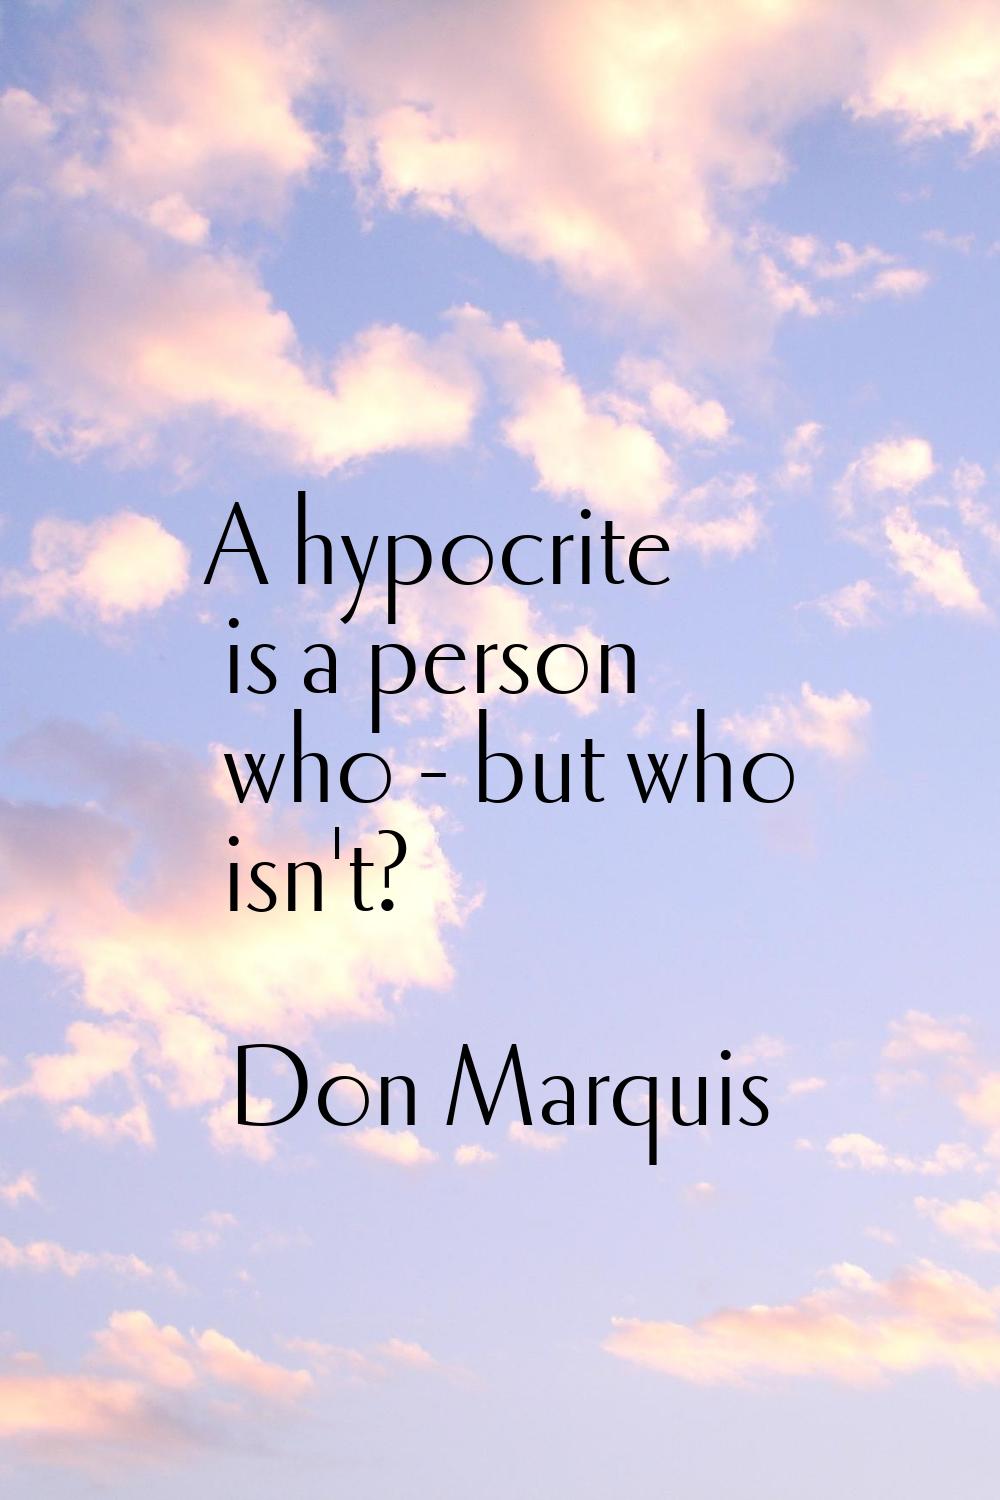 A hypocrite is a person who - but who isn't?